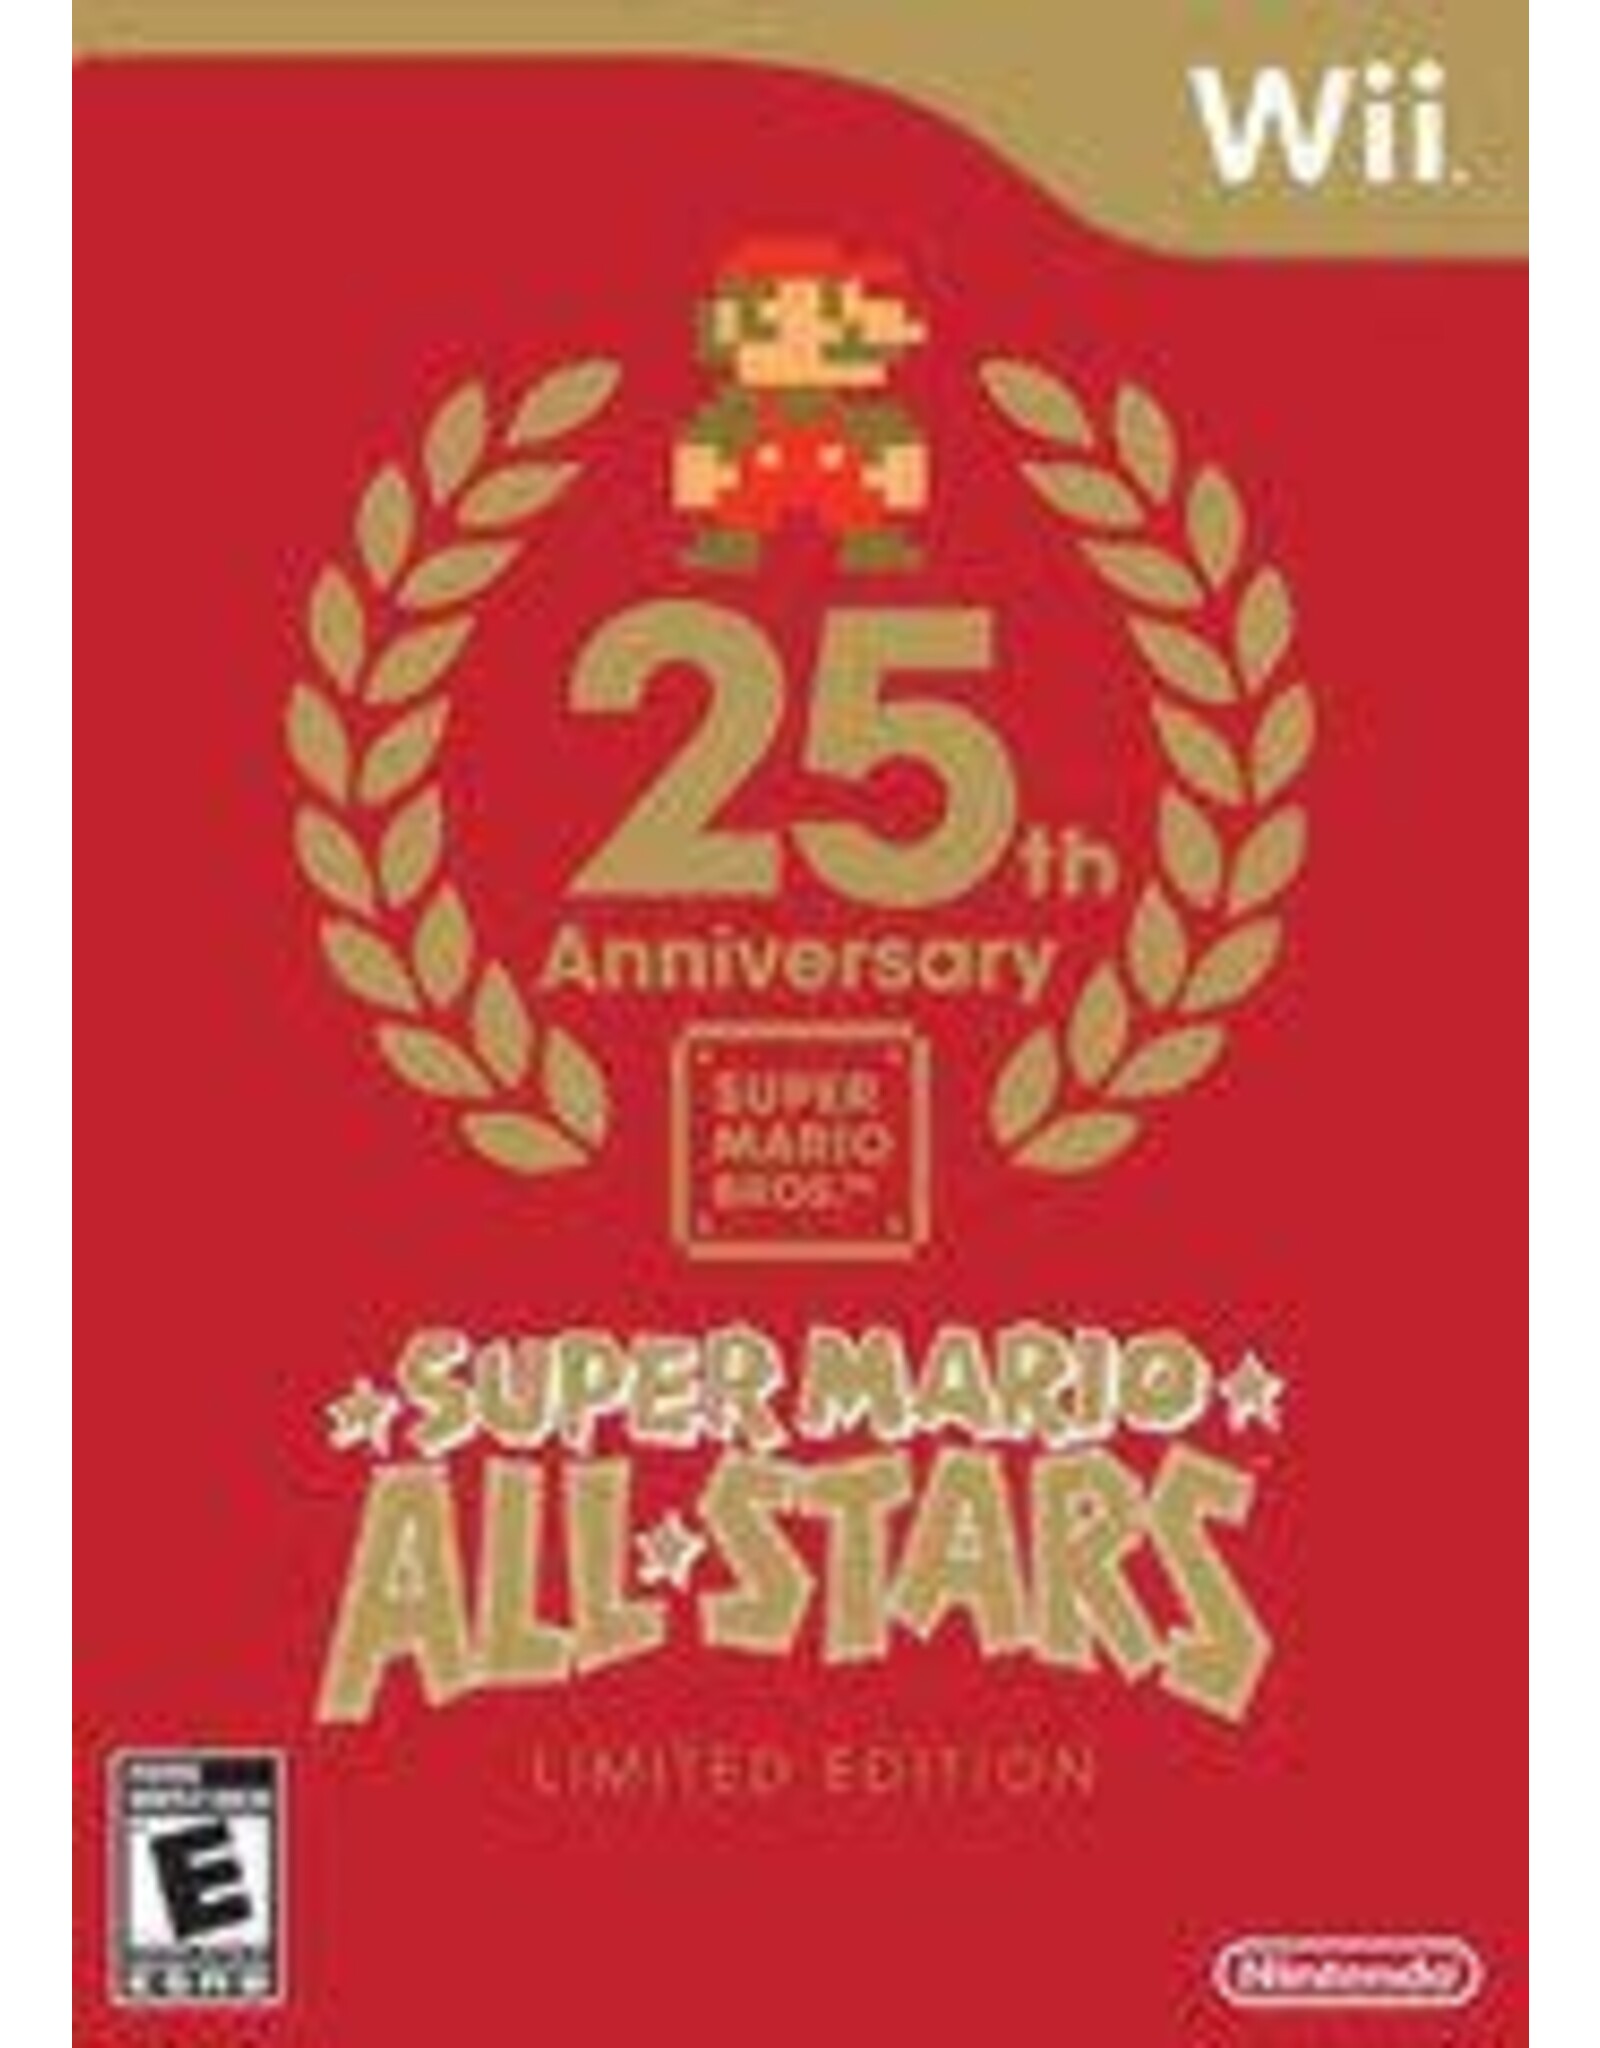 Wii Super Mario All-Stars - Limited Edition (Used)